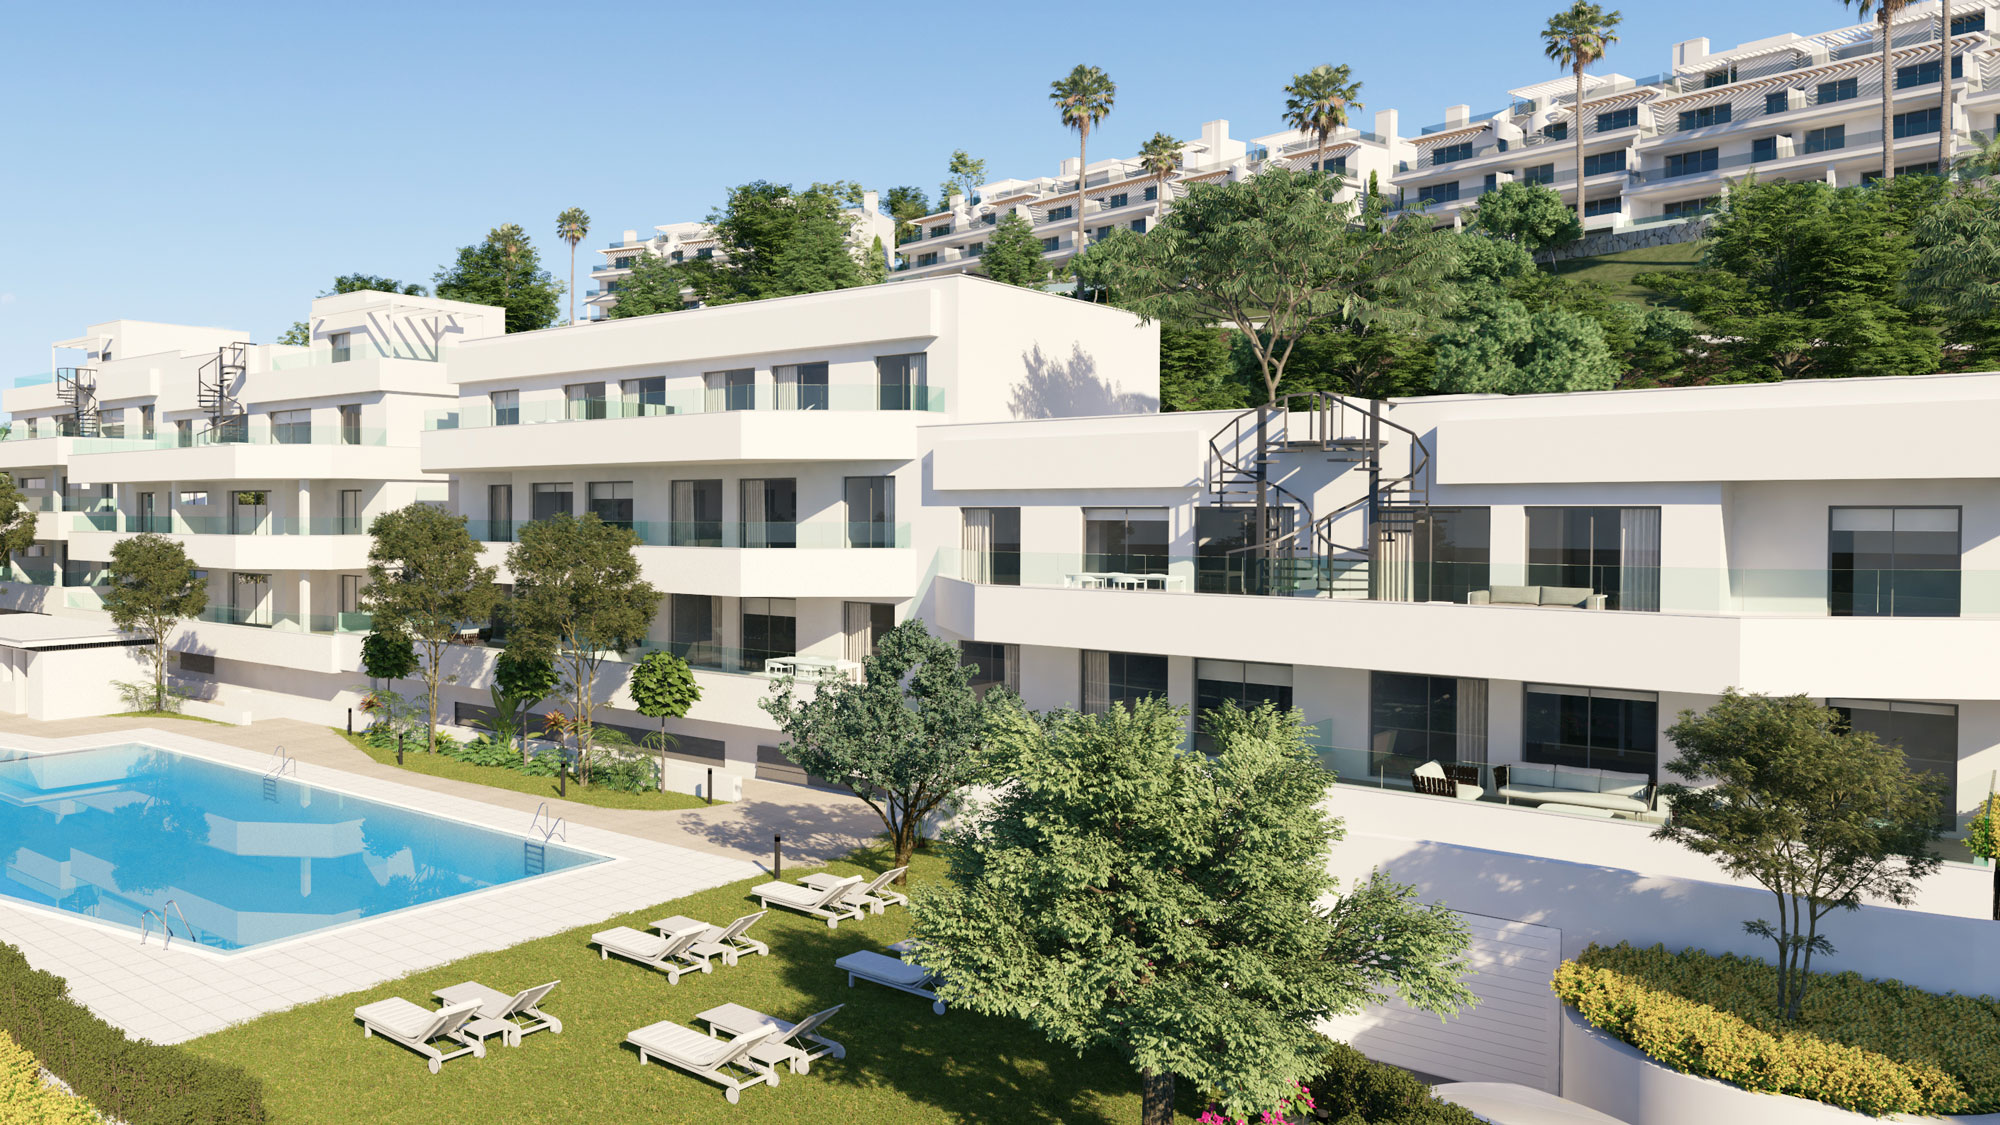  Avant-garde apartments in the New Golden Mile of Estepona